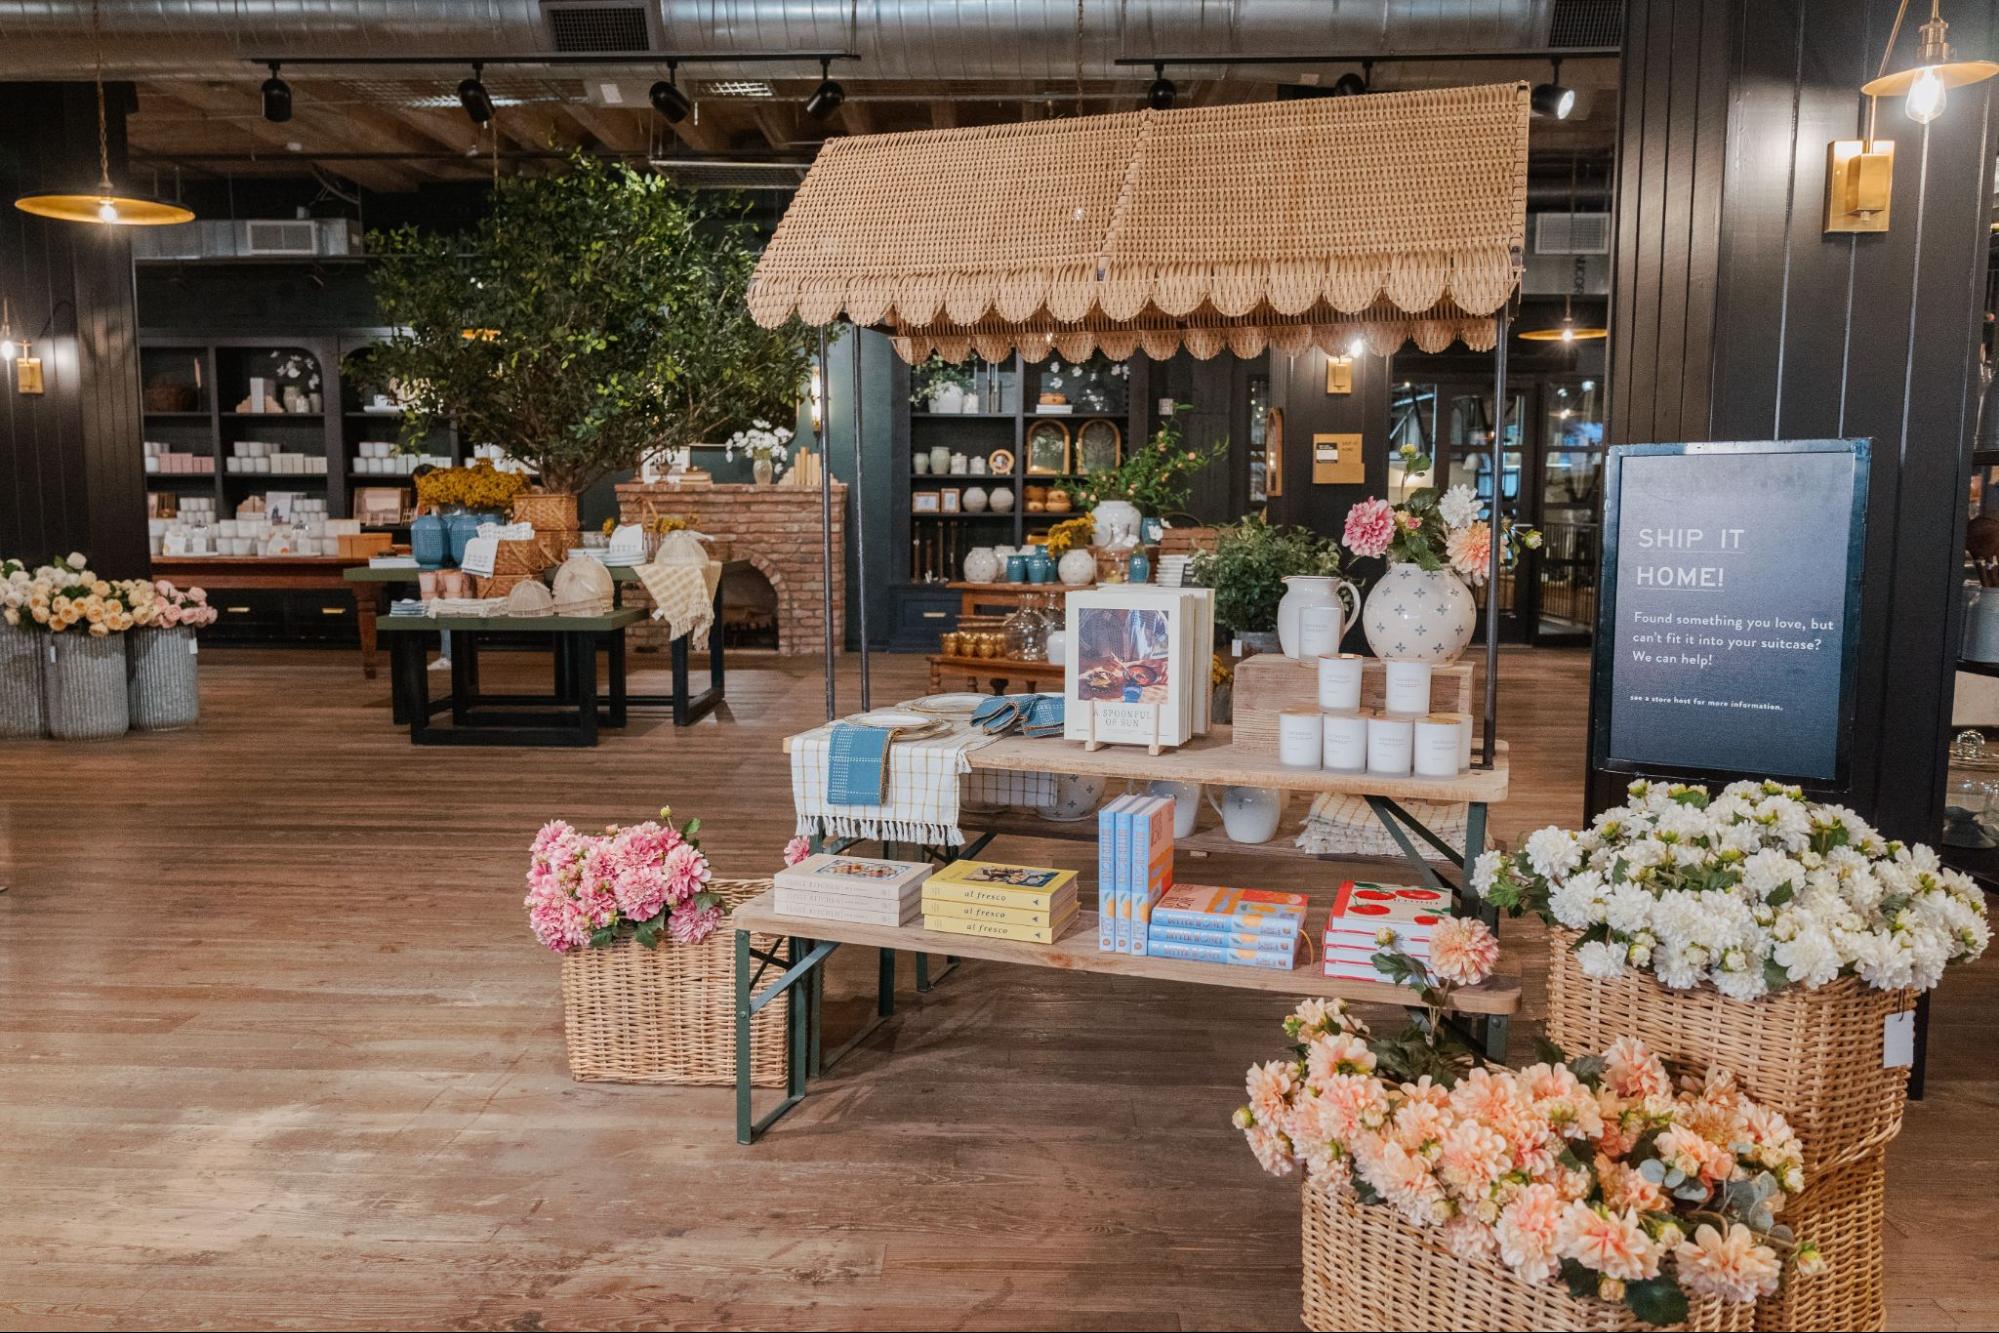 Magnolia Market is dressed with summer displays, like a scalloped canopy, faux florals, candles, cookbooks, and more.